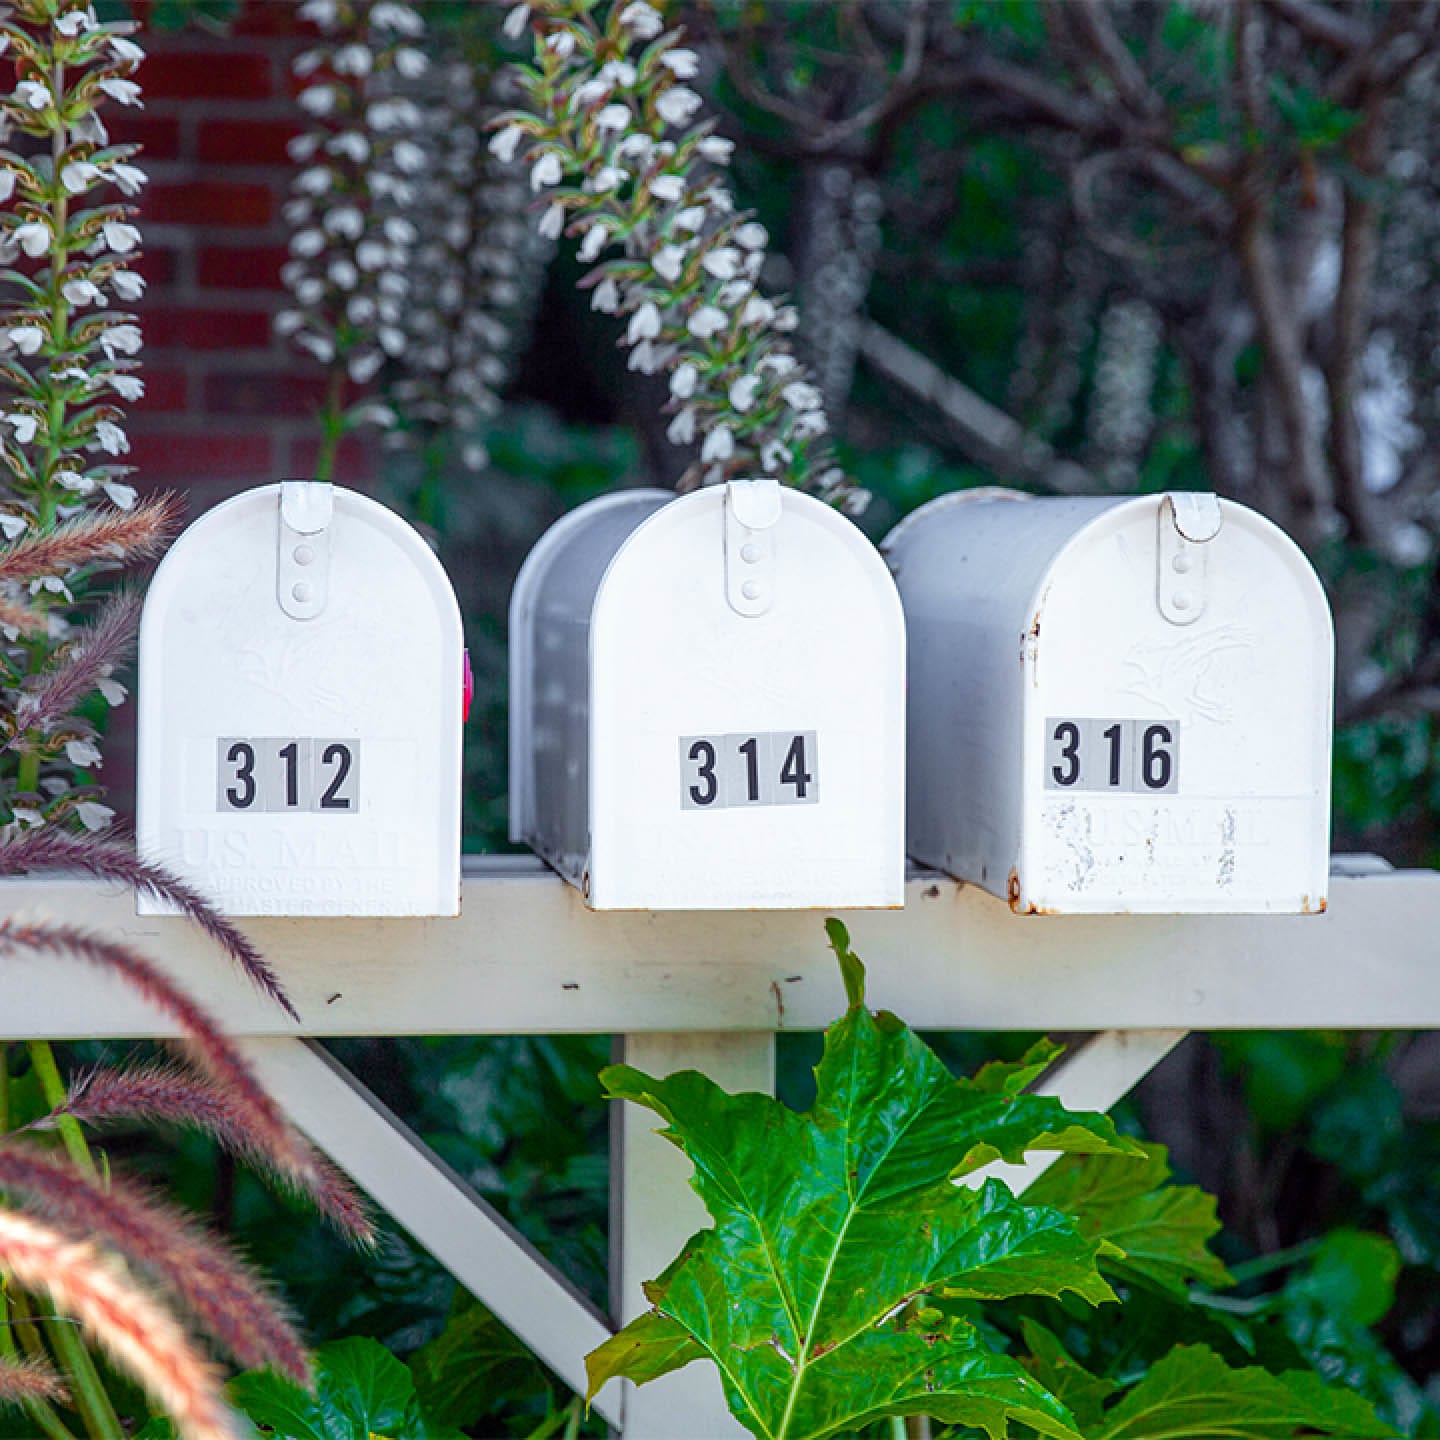 Three mailboxes in a row.